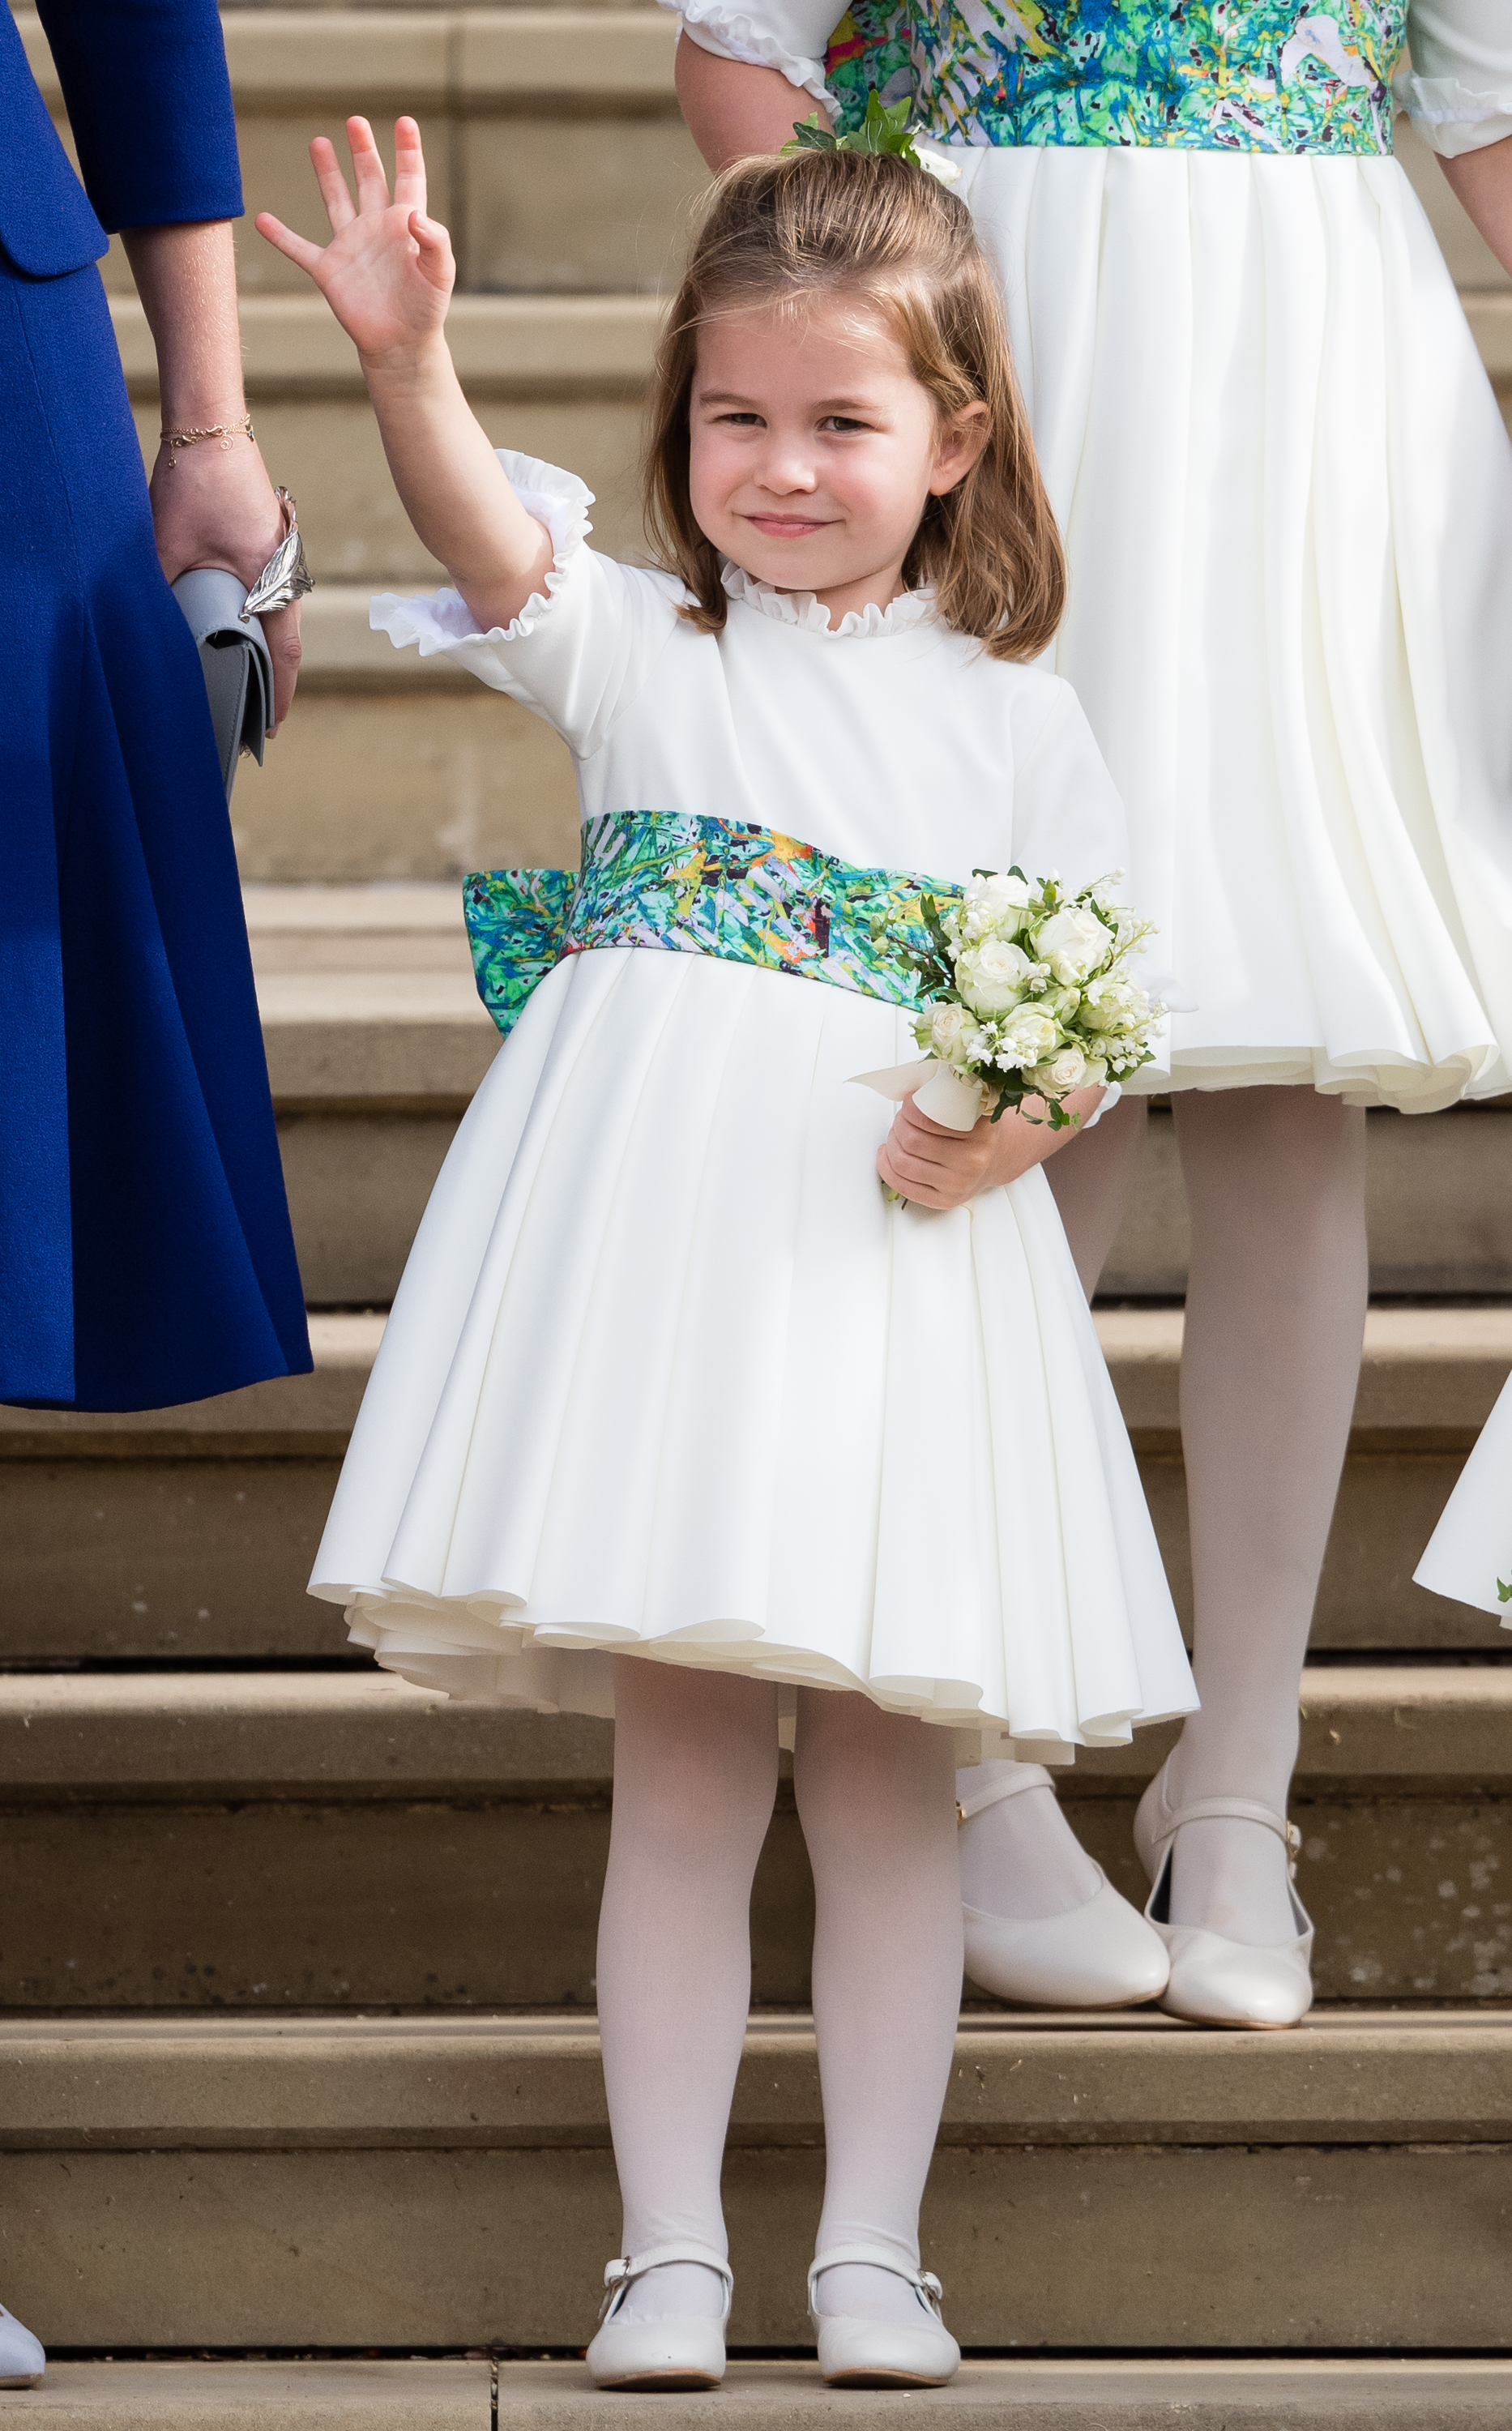 Princess Charlotte at the wedding of Princess Eugenie and Jack Brooksbank on October 12, 2018, in Windsor, England. | Source: Getty Images